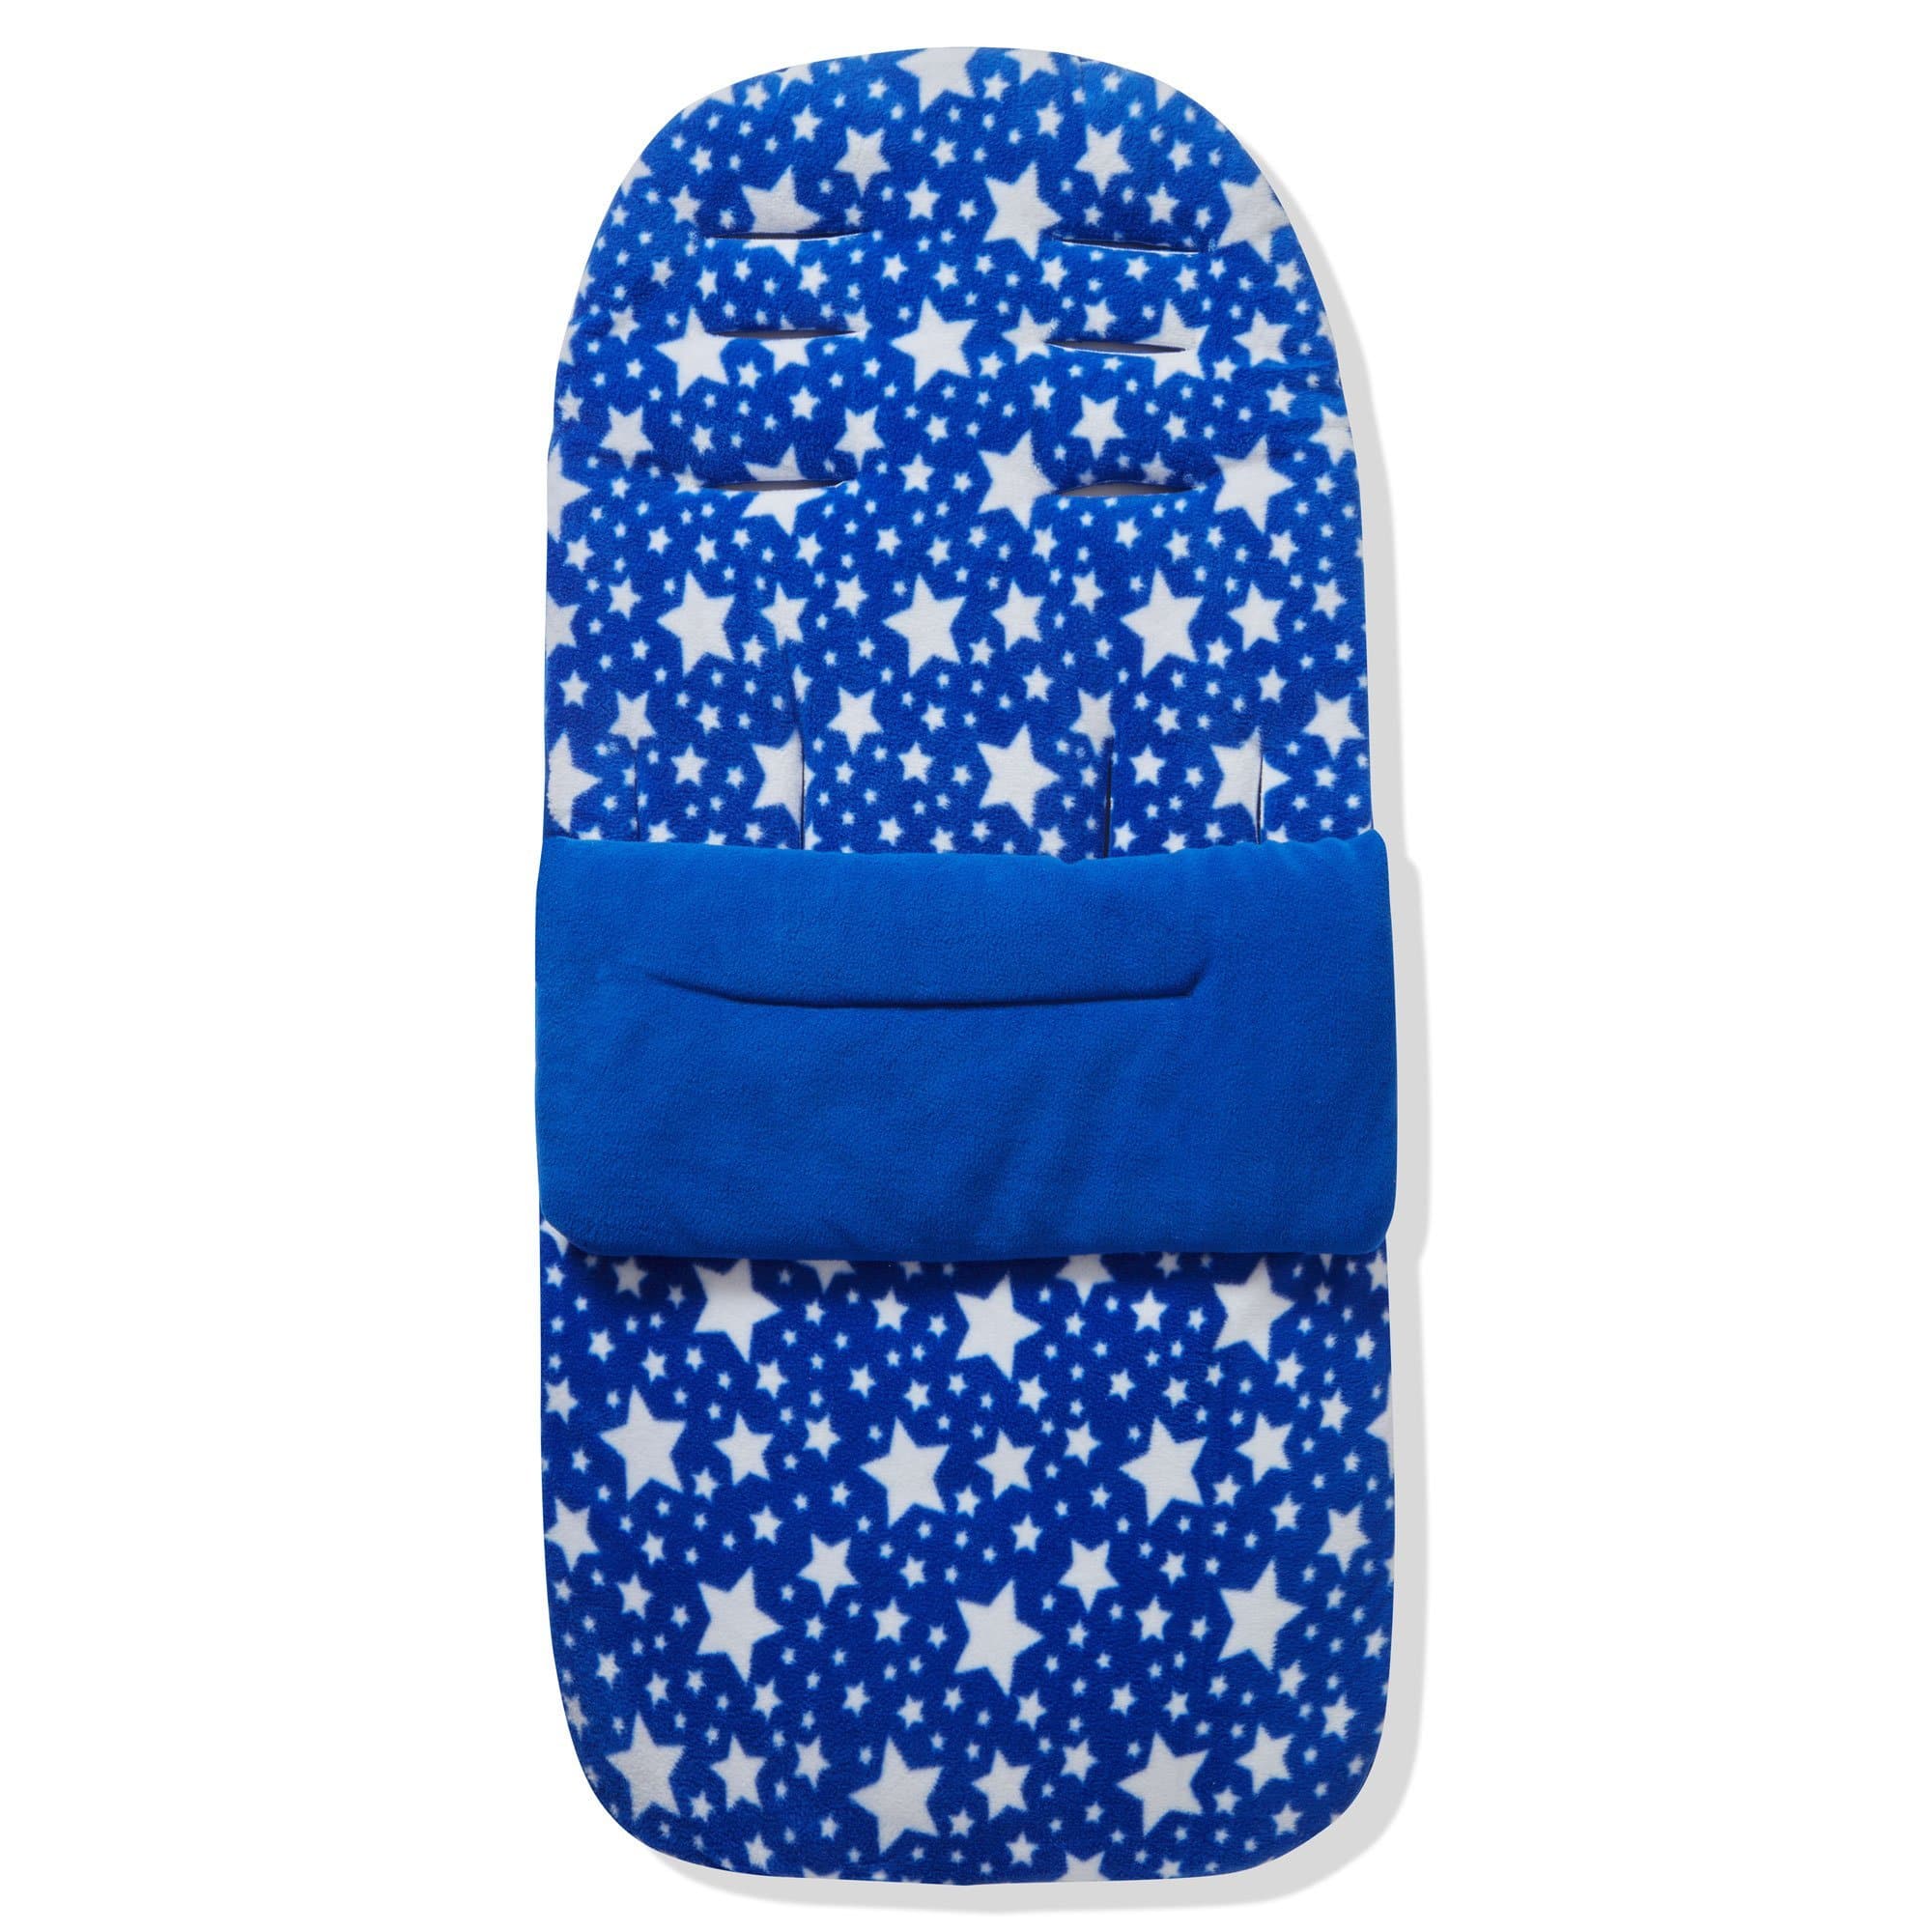 Fleece Footmuff / Cosy Toes Compatible with TFK - Blue Star / Fits All Models | For Your Little One